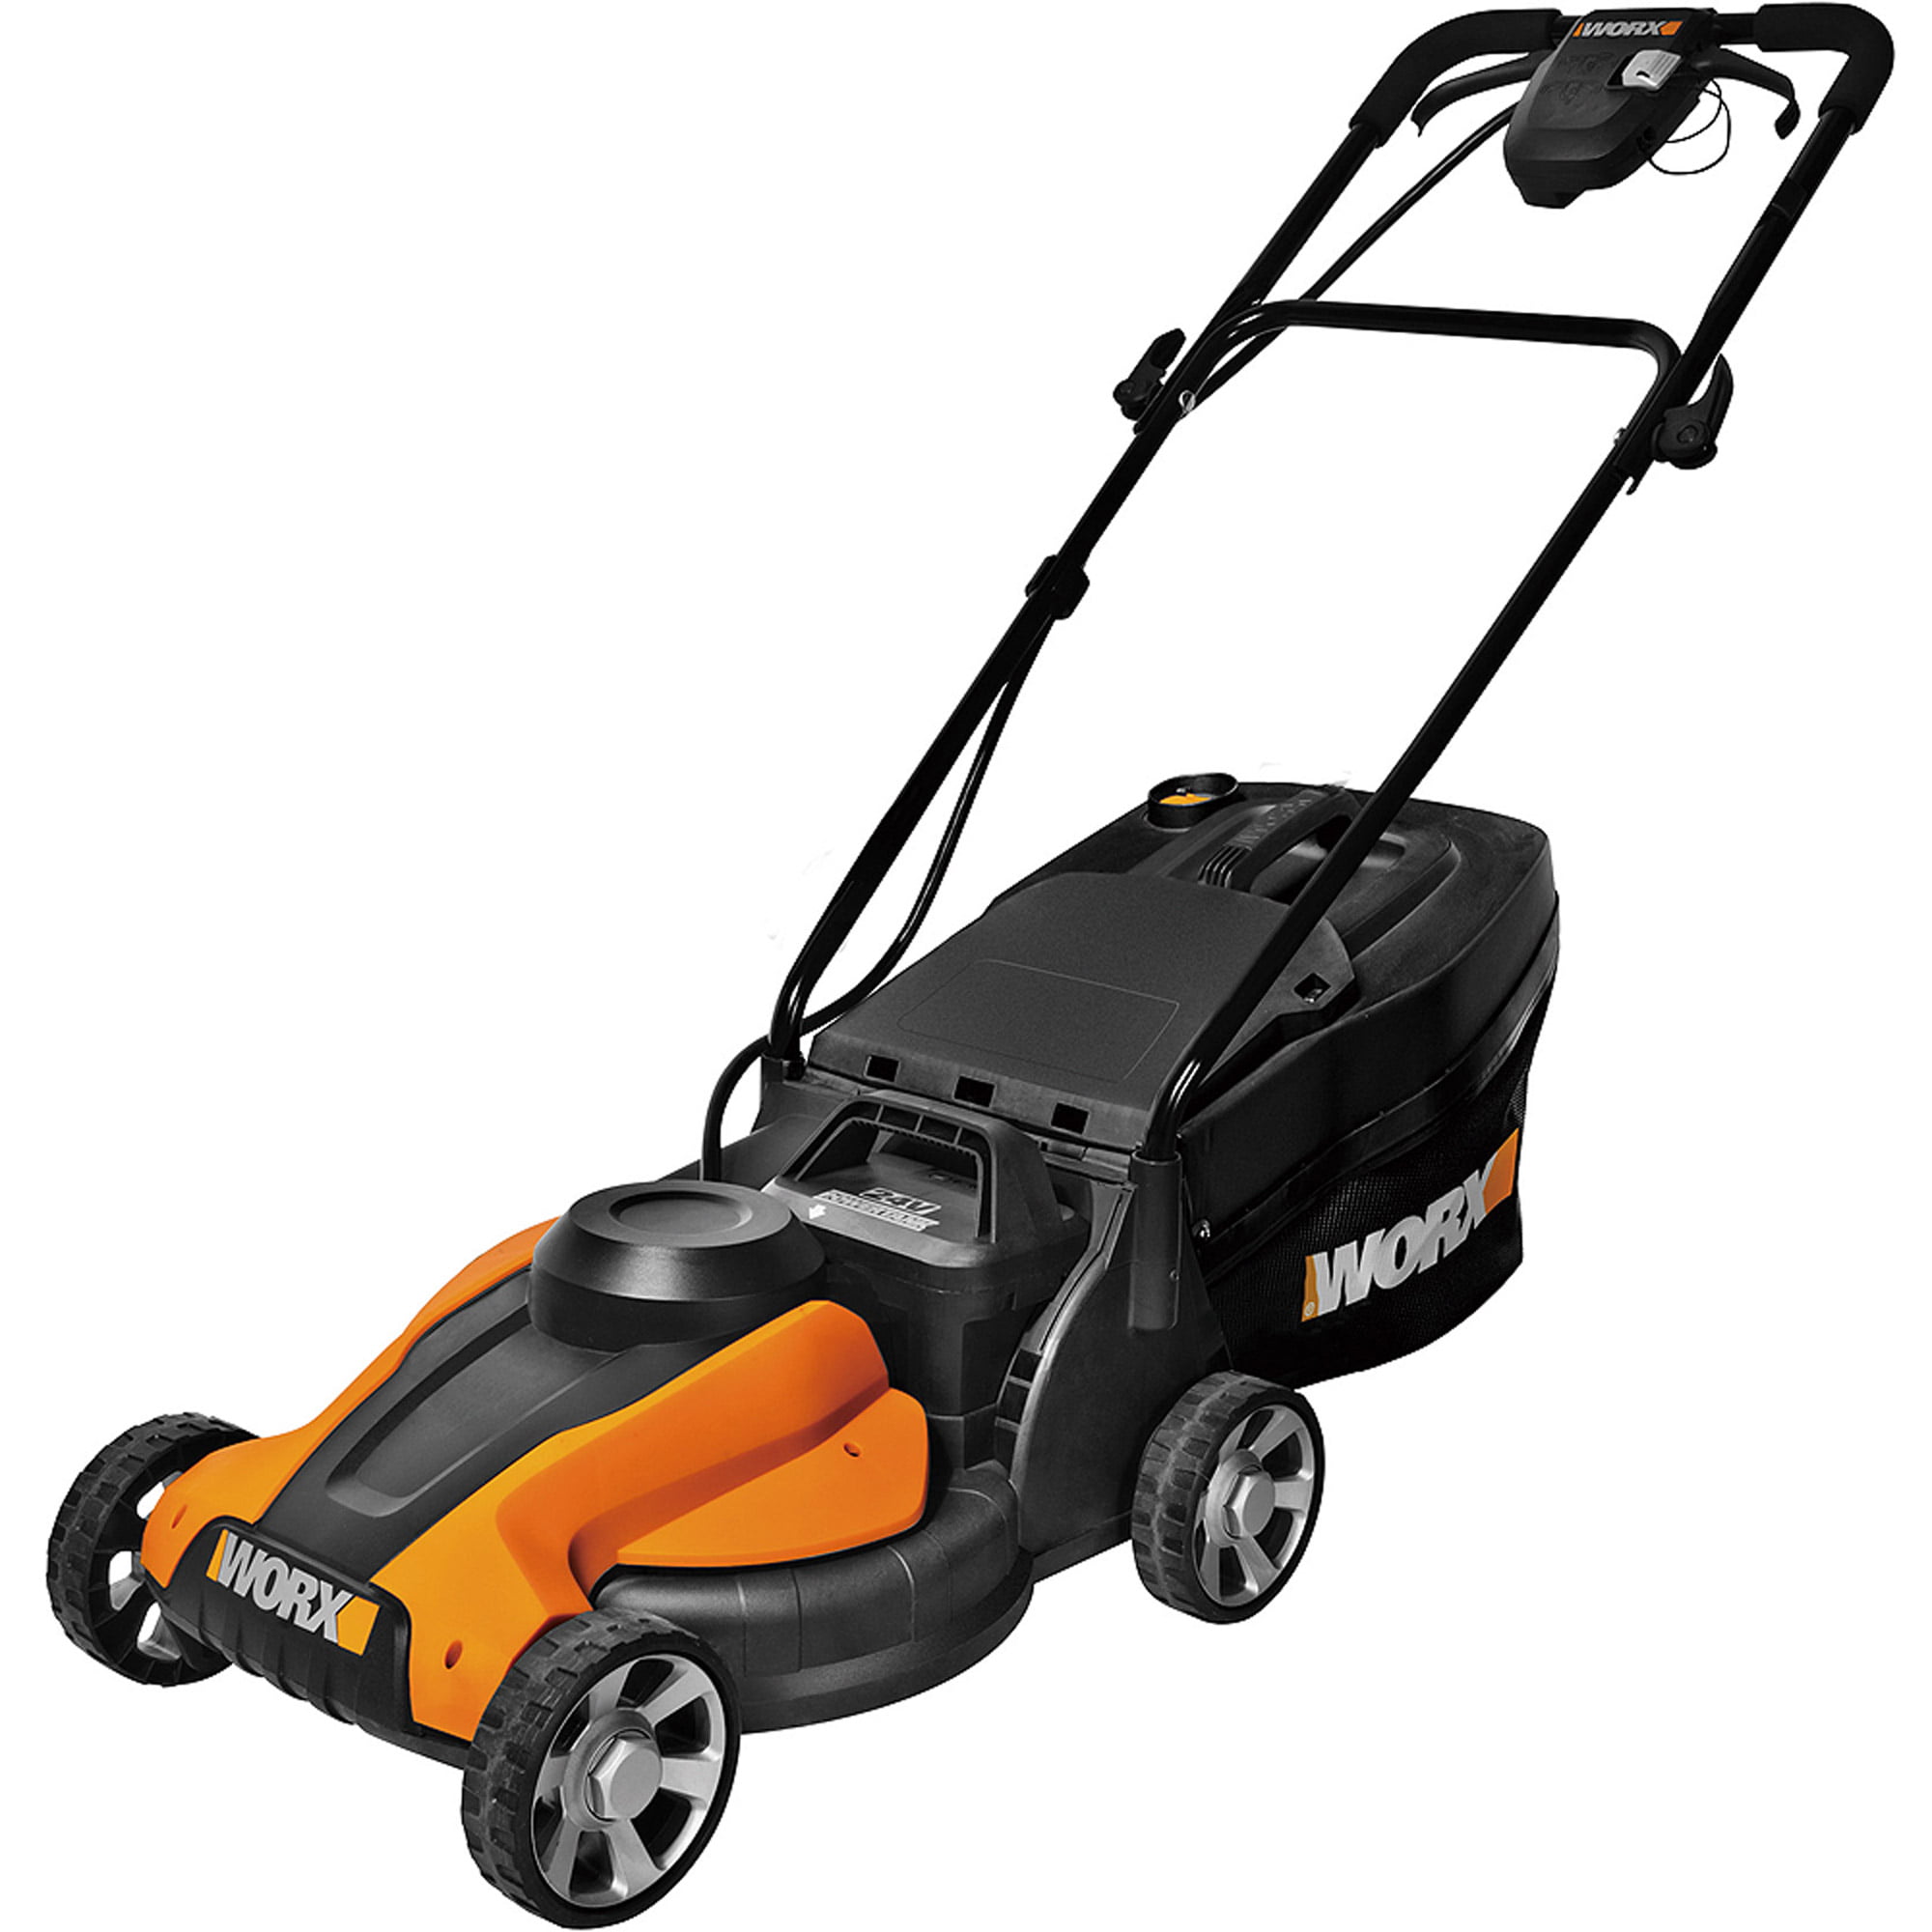 WORX WG775 14" Cordless Electric Powered Lawn Mower